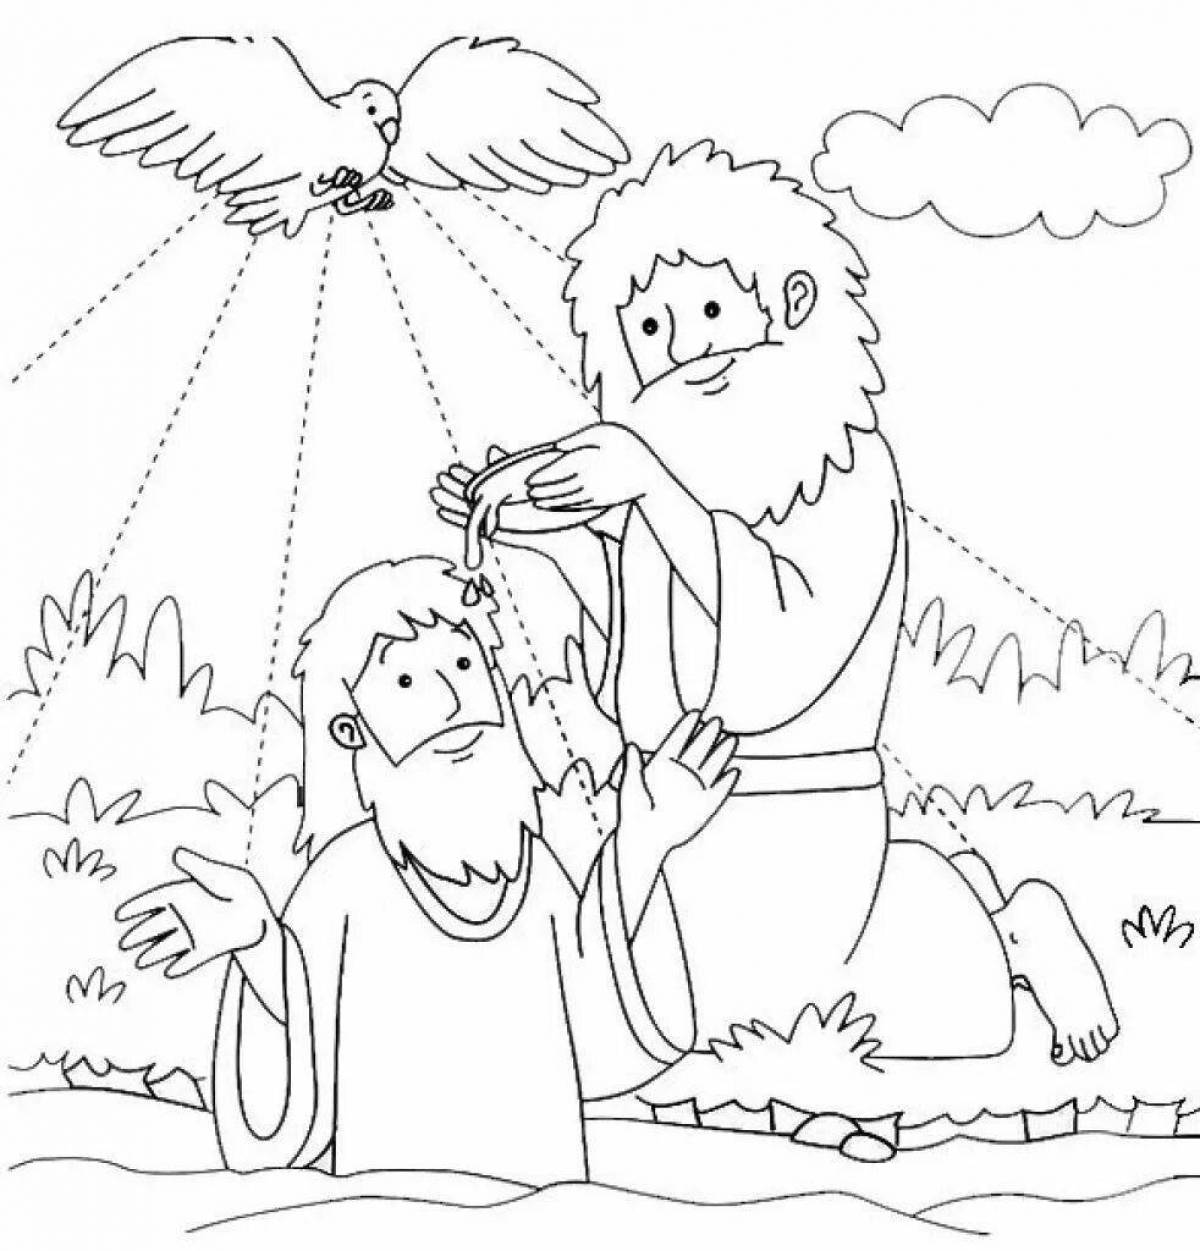 Amazing christening coloring page